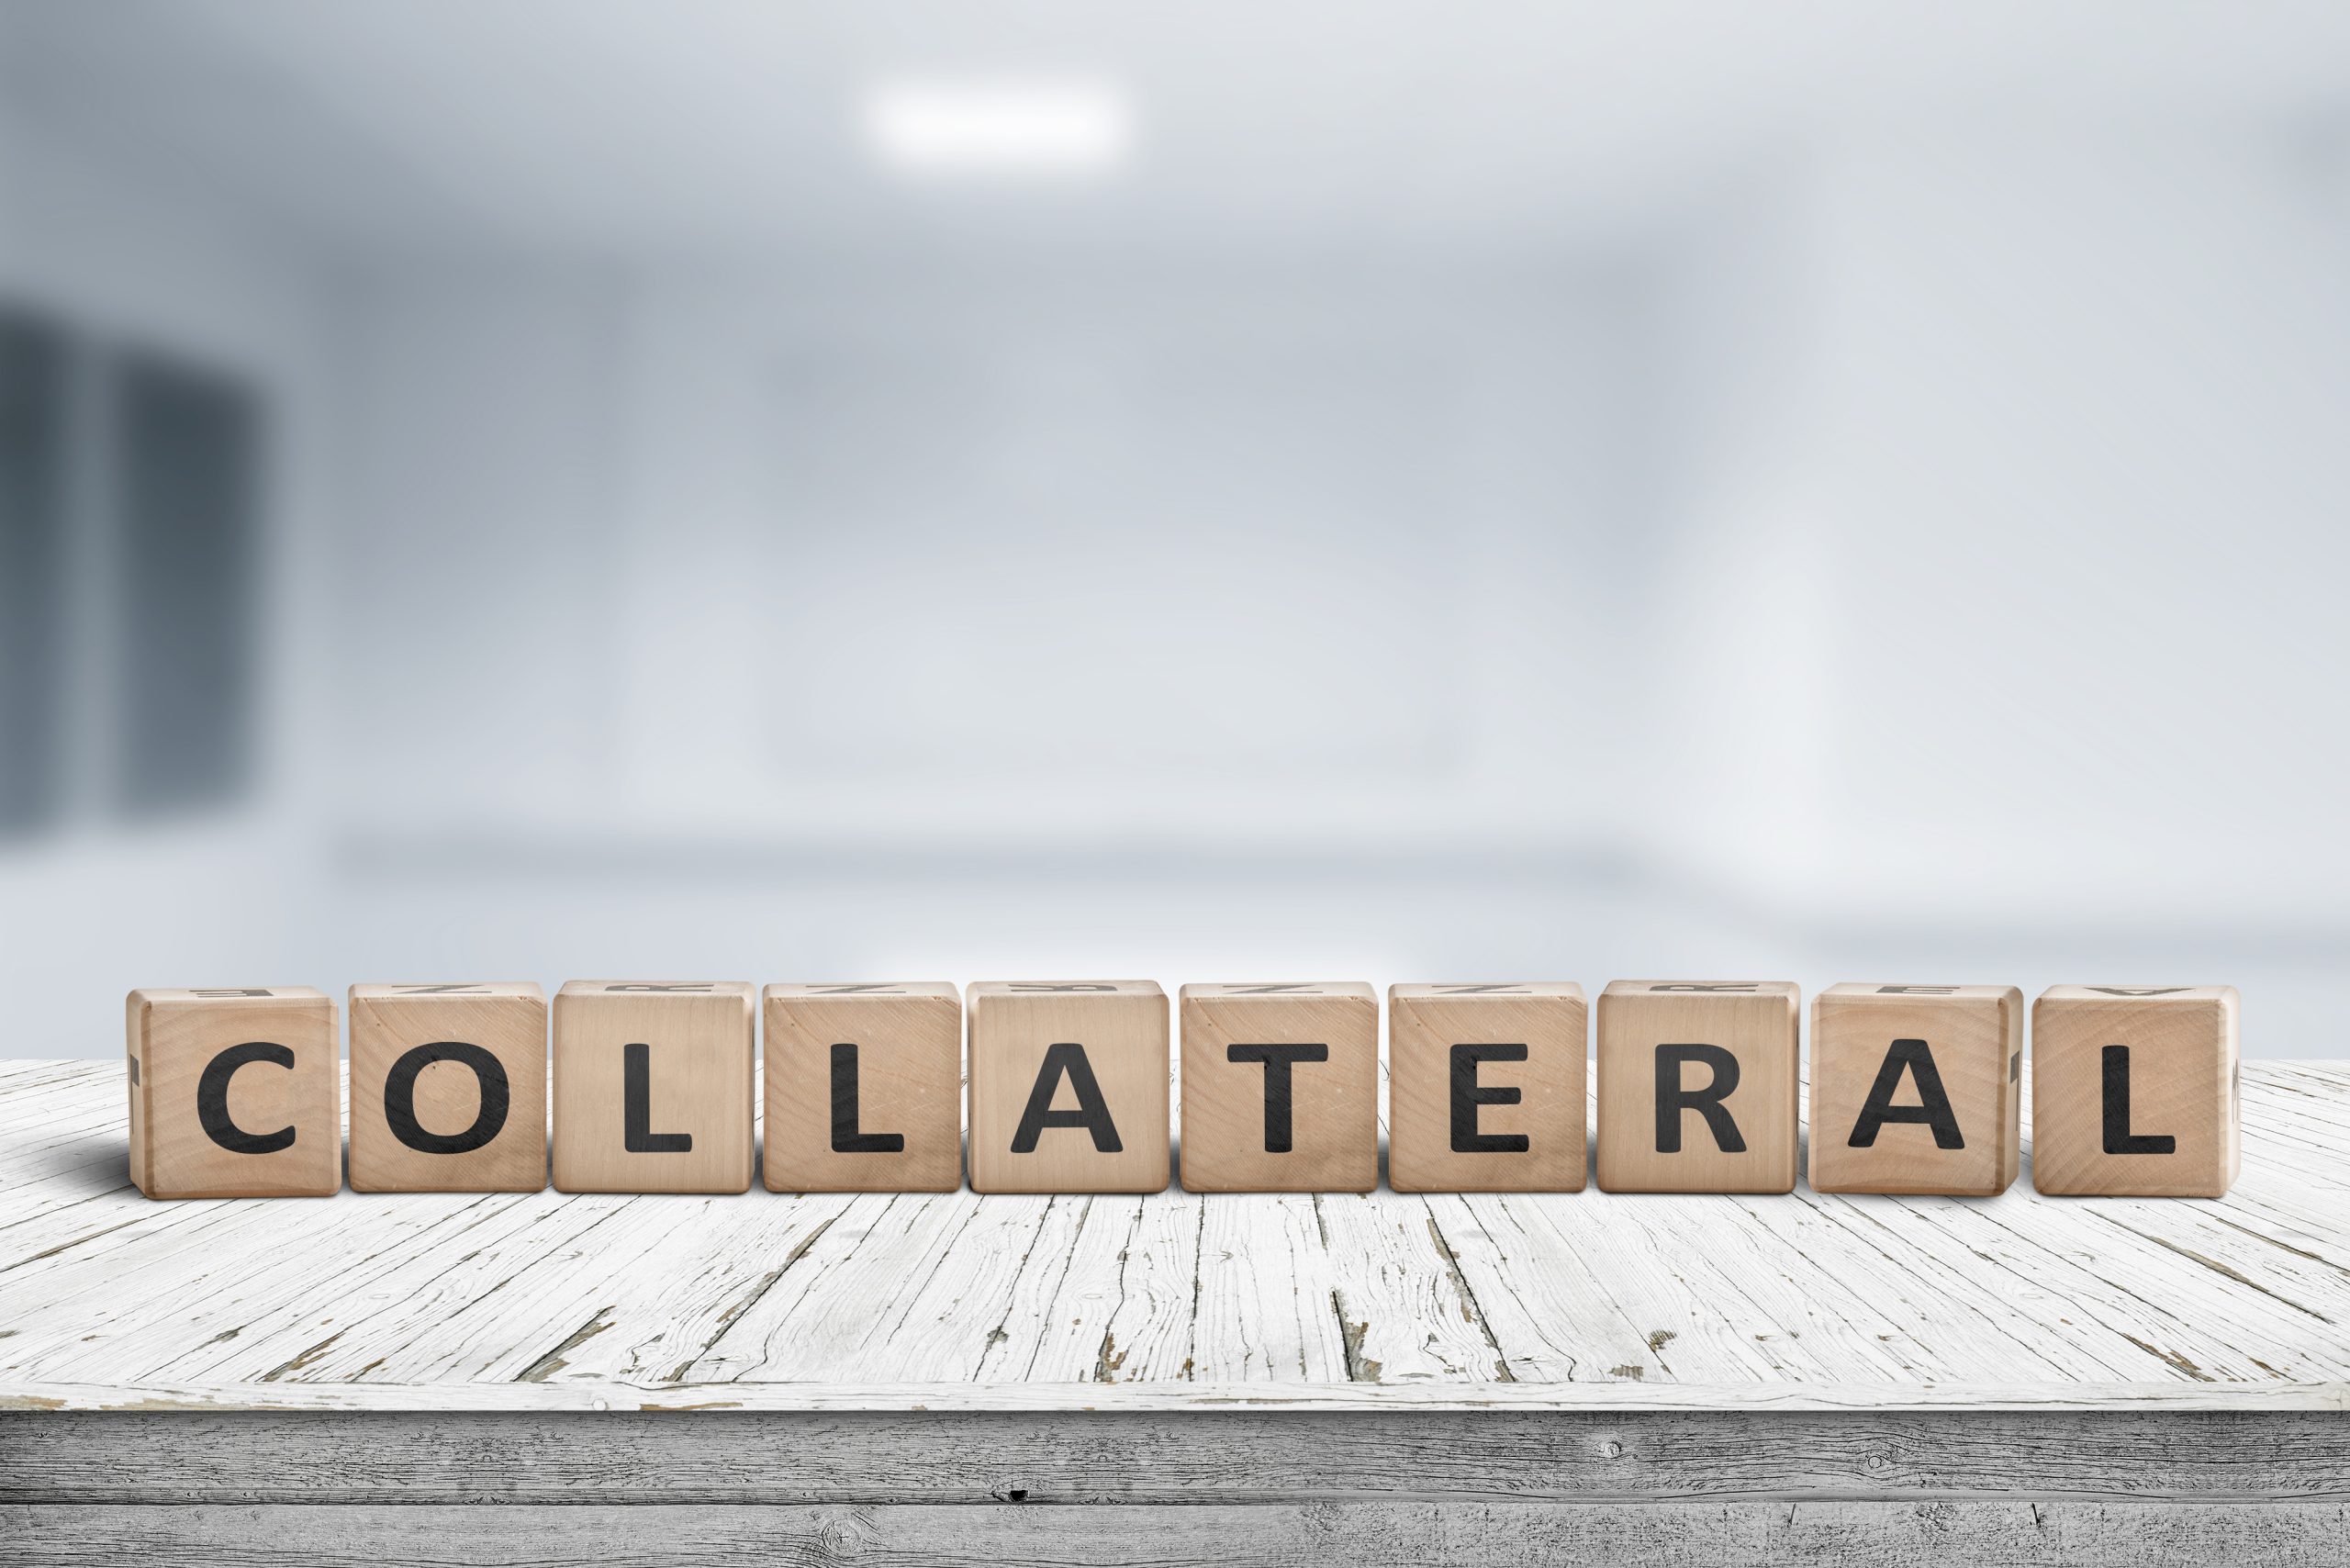 Common Forms of Collateral Accepted For Bail Bonds